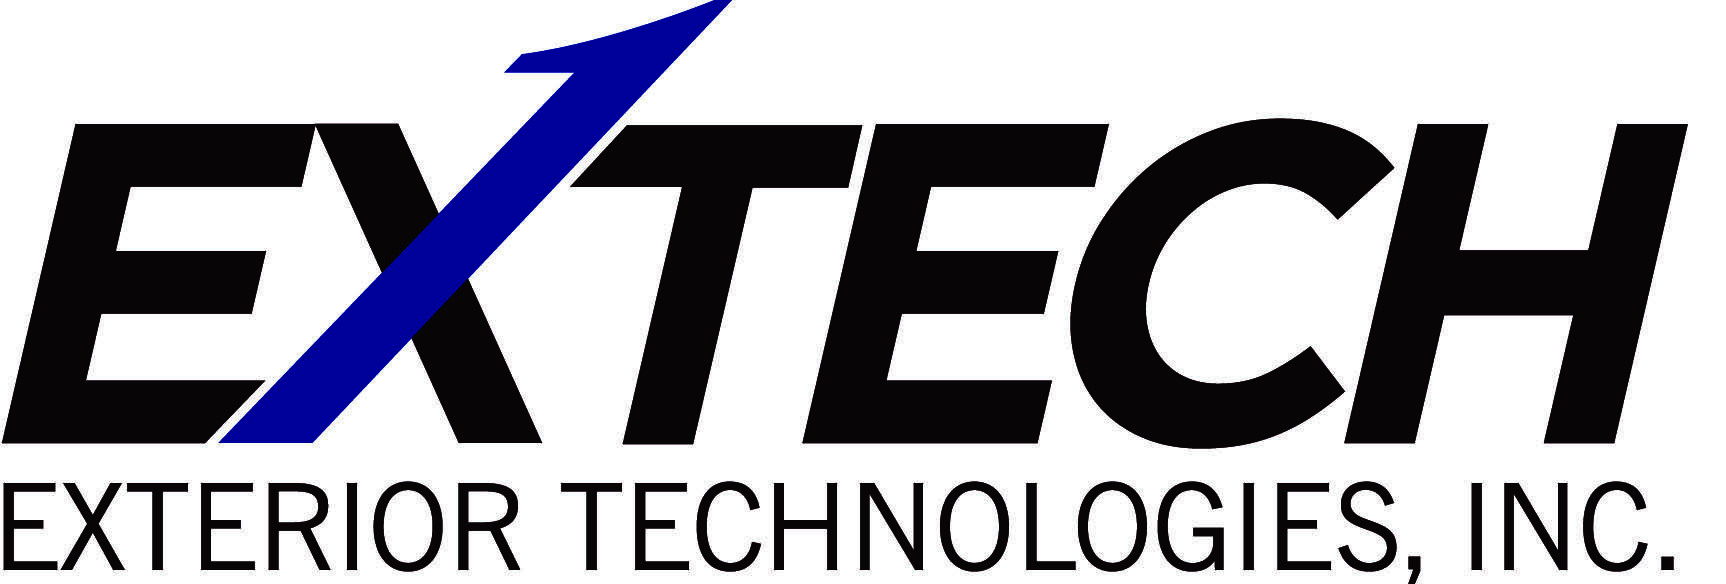 EXTECH acquires Martin Metal Designs of Las Vegas
              Posted March 04, 2022
              EXTECH/Exterior Technologies Inc., headquartered in Pittsburgh, has purchased the assets of Martin Metal Designs, located in Las Vegas.